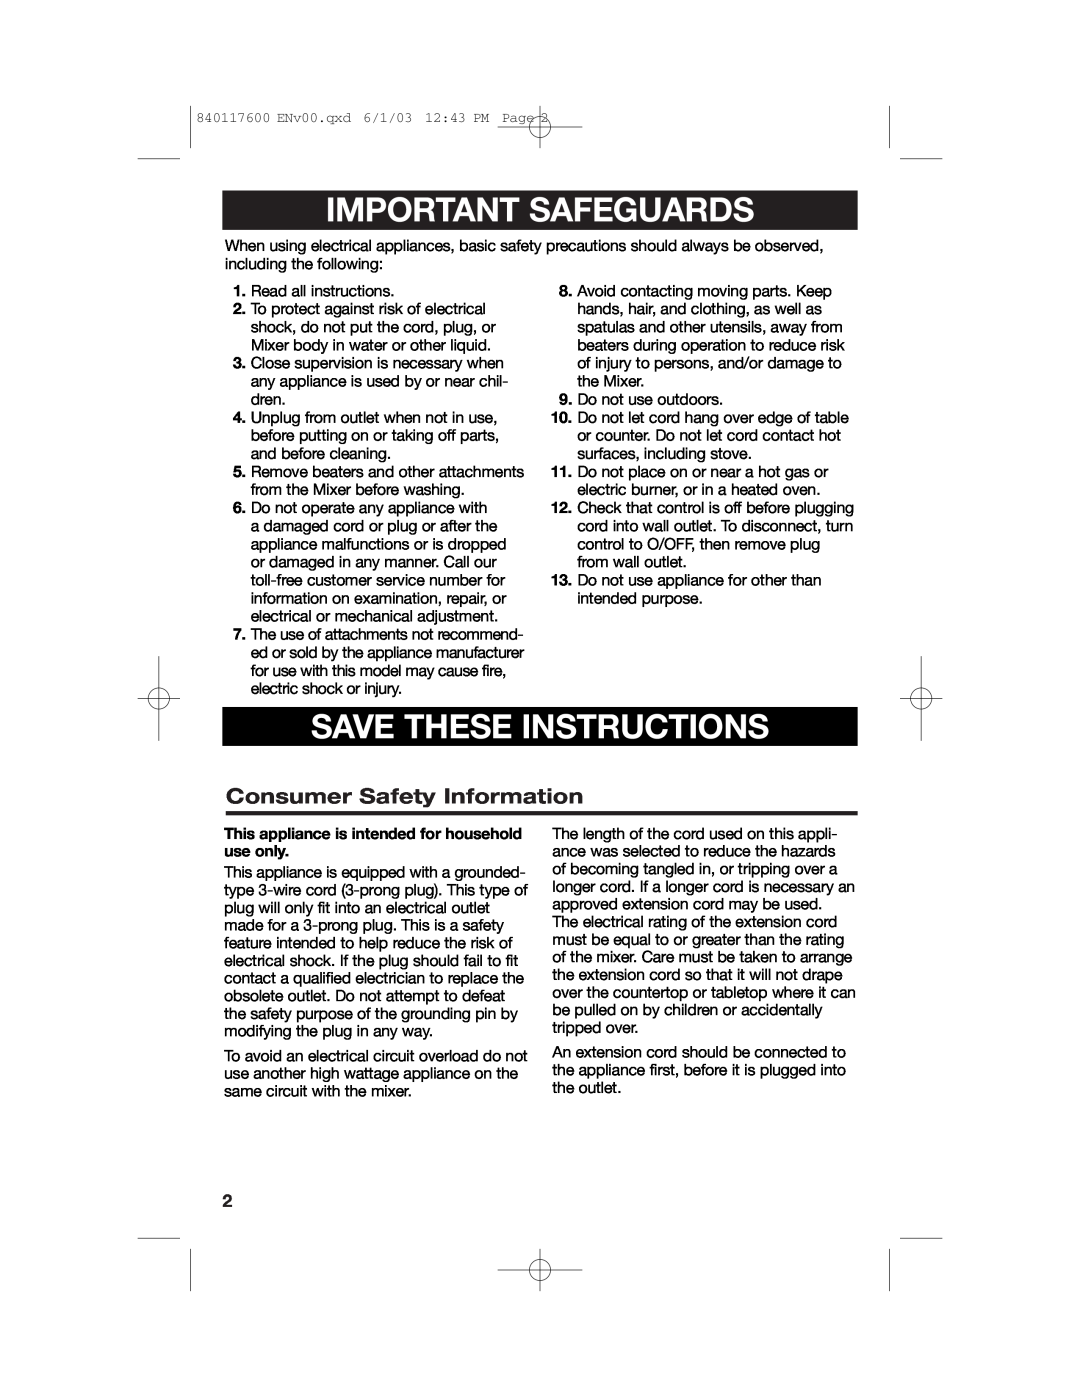 Hamilton Beach 840117600 manual Important Safeguards, Save These Instructions, Consumer Safety Information 